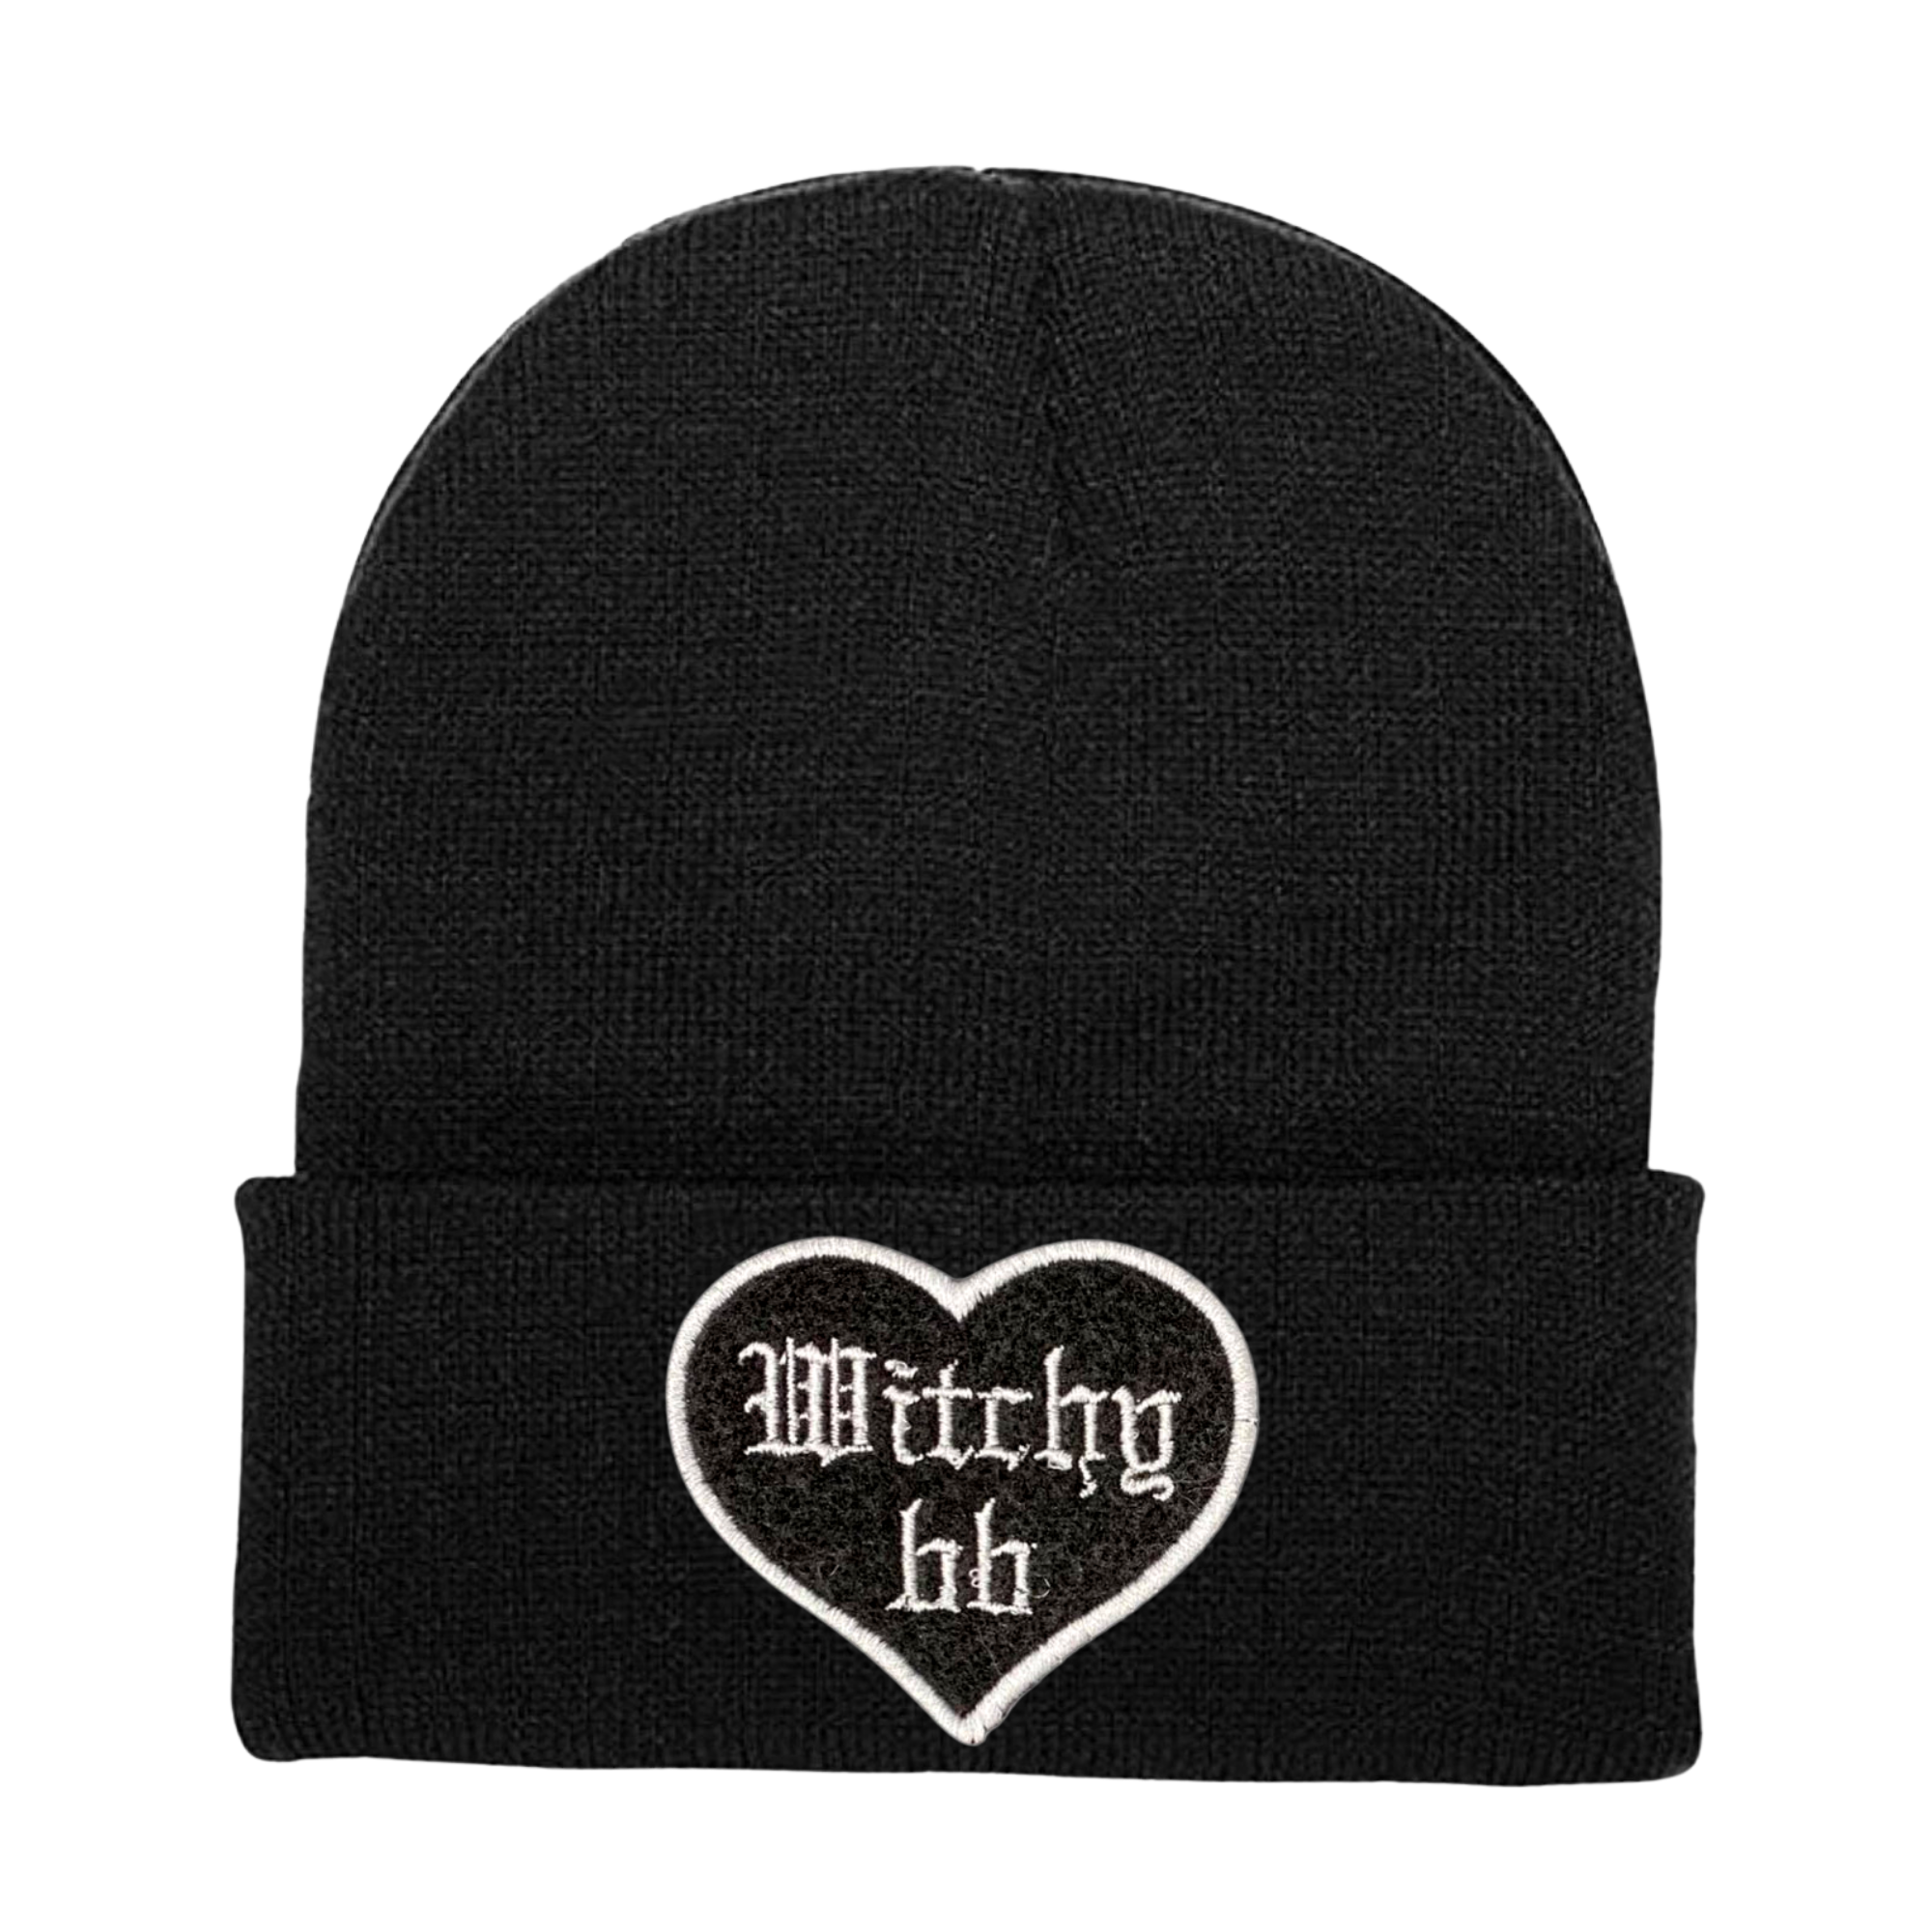 Witchy bb Halloween Embroidered Patch Beanie Unisex